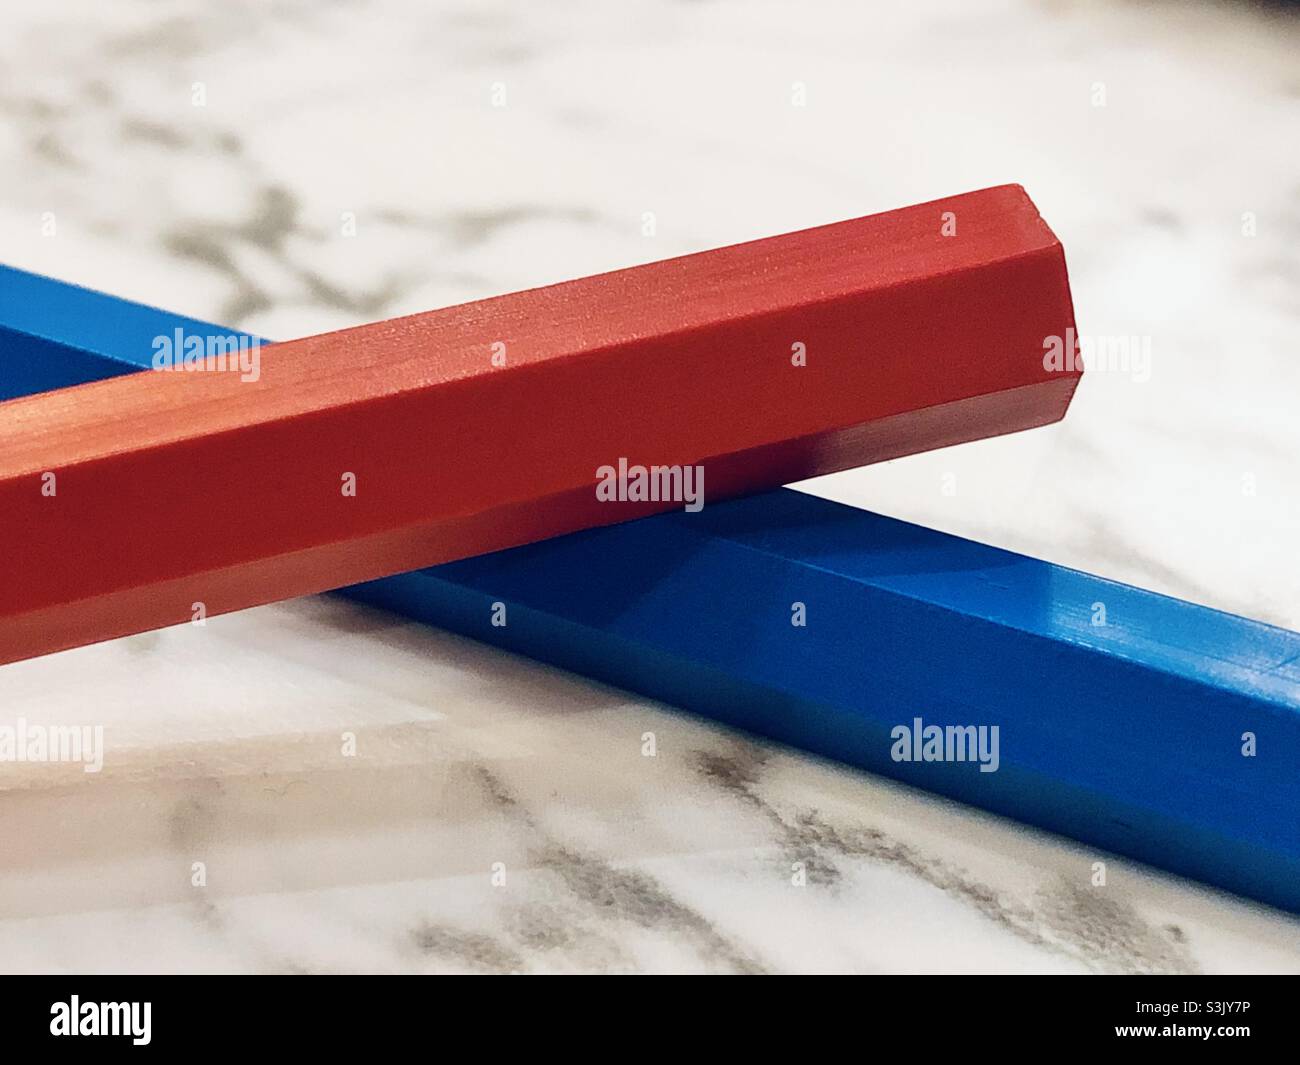 Blue and red crayons on marble table Stock Photo